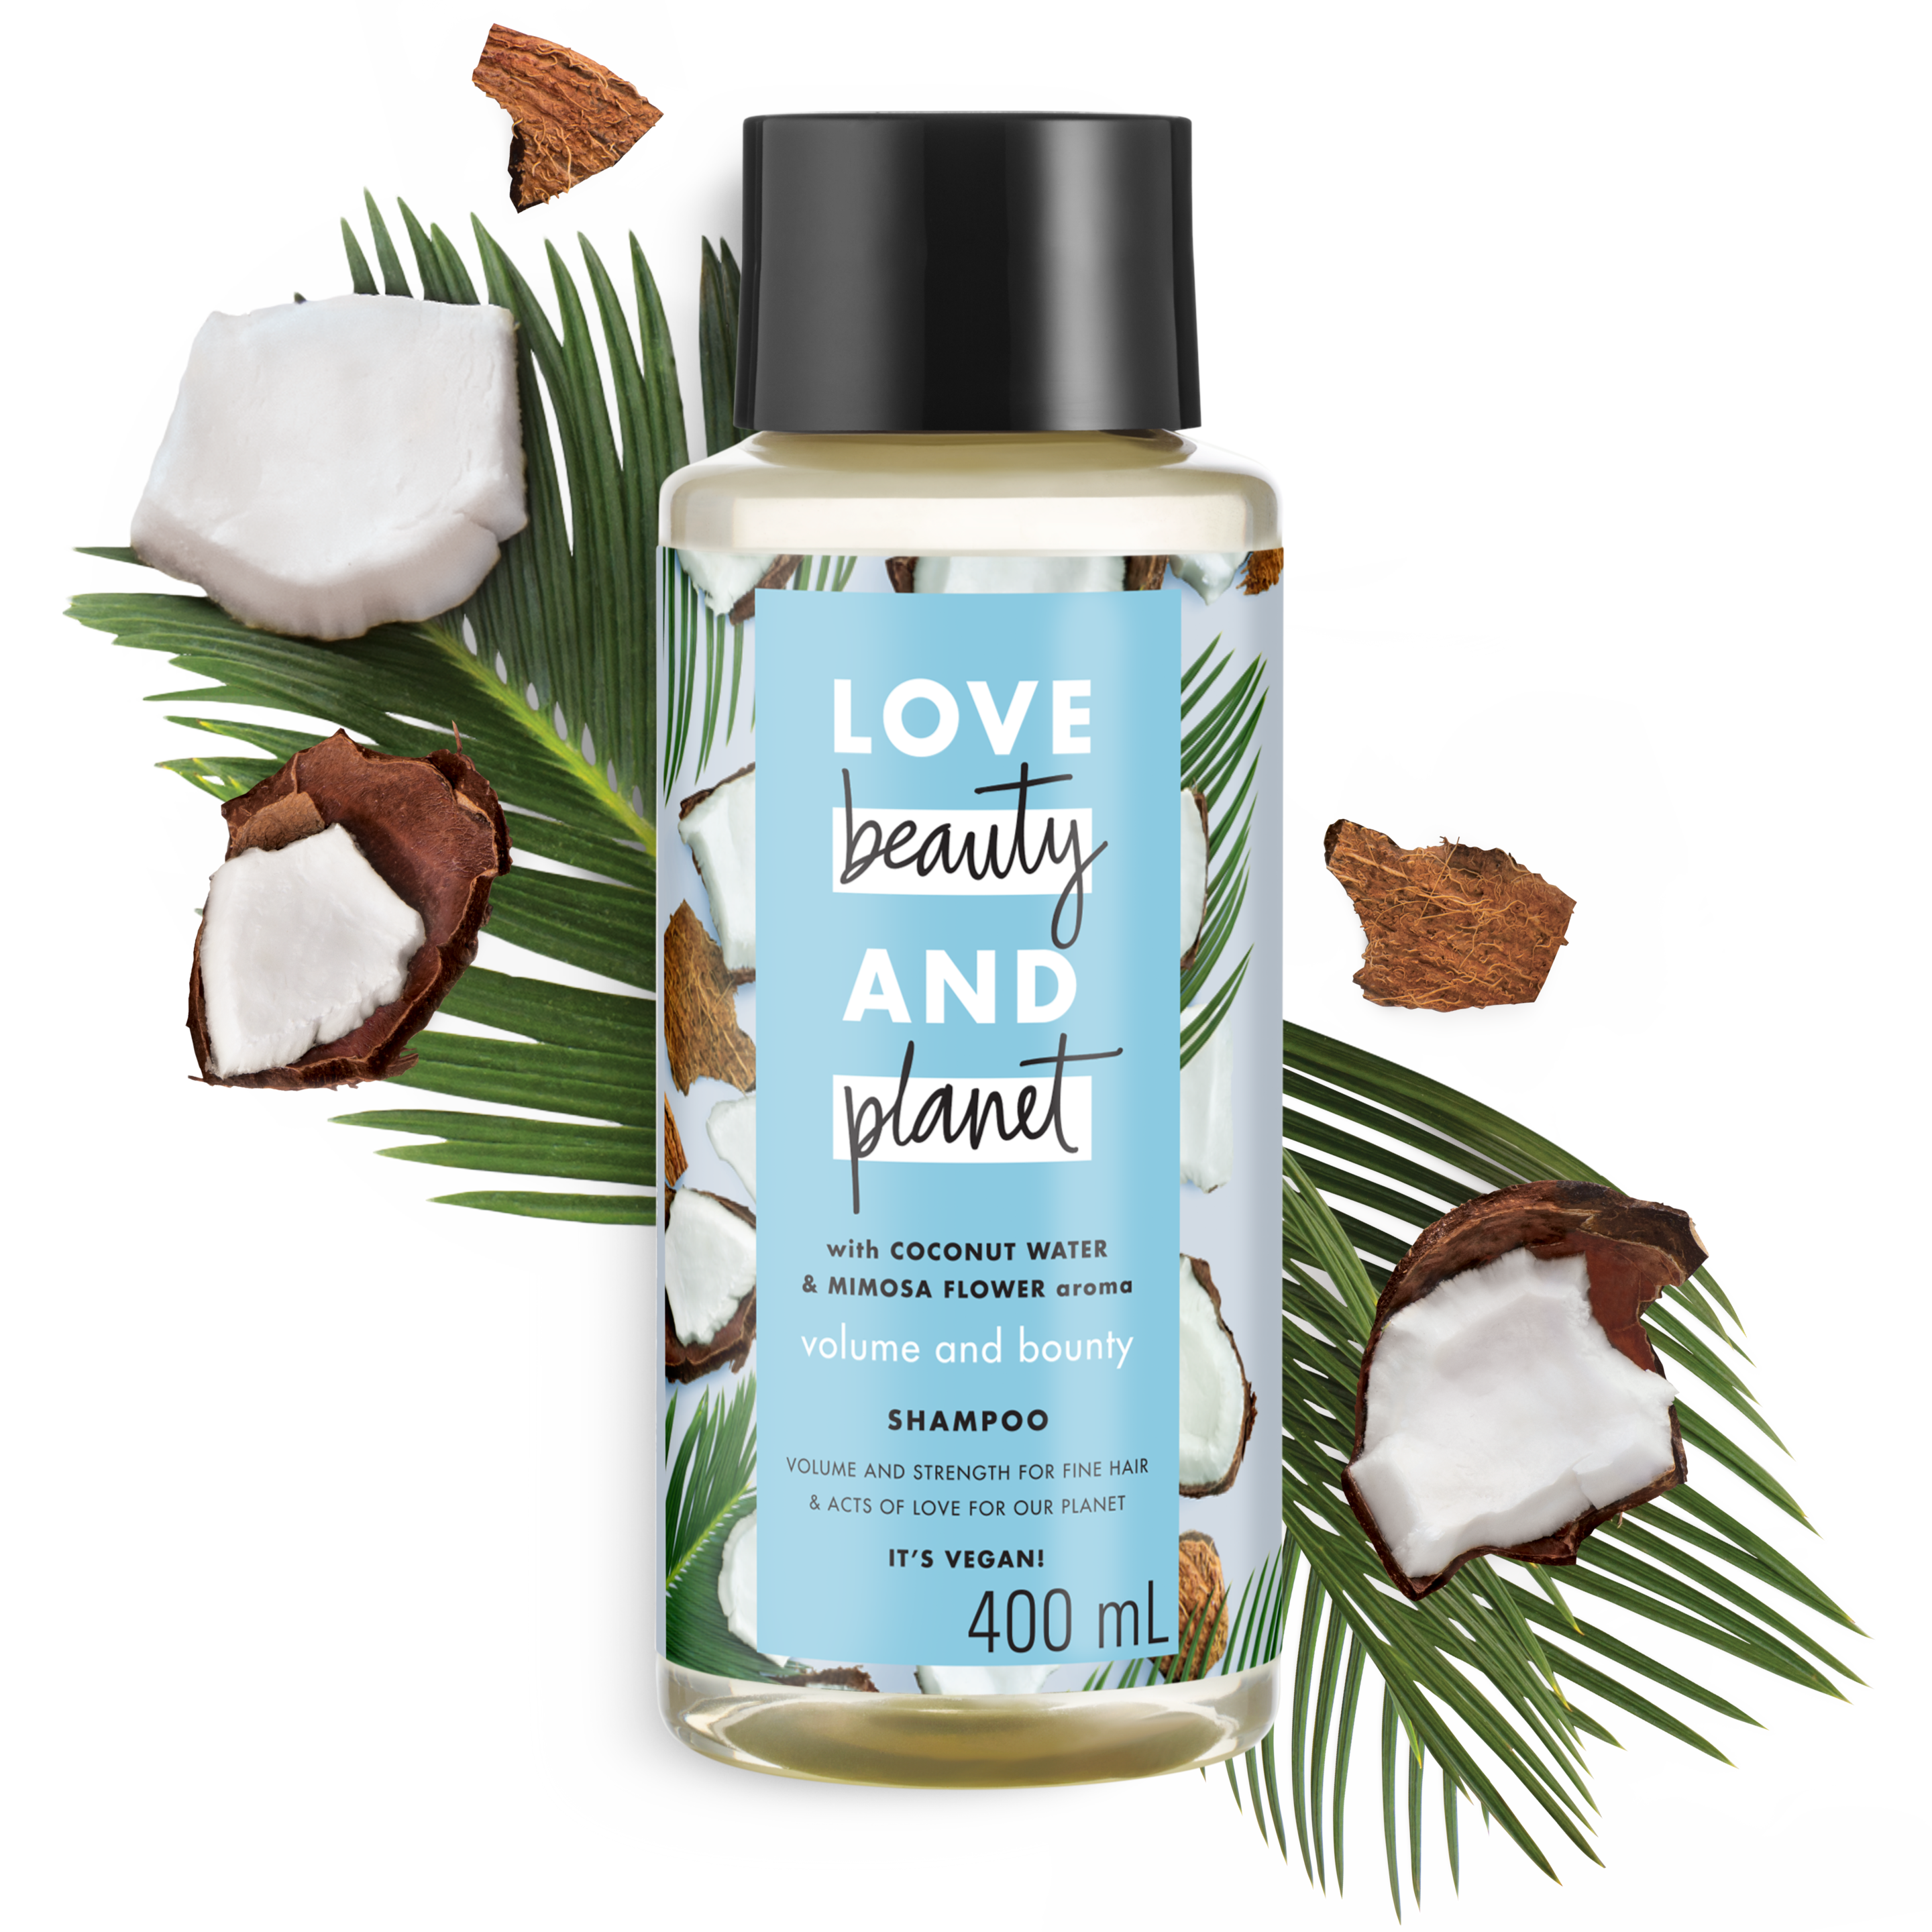 coconut water & mimosa flower shampoo Text